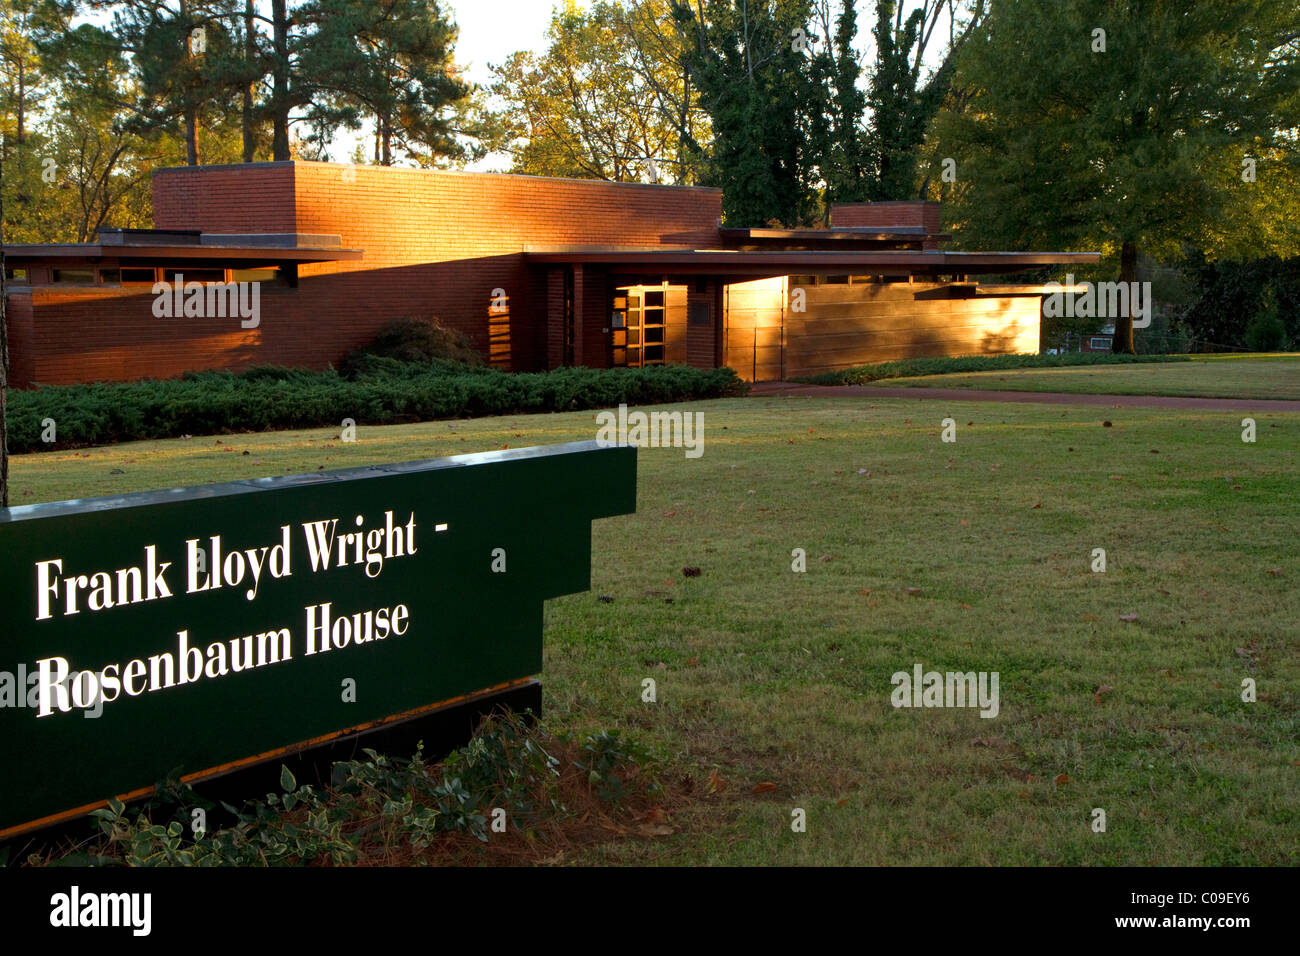 The Rosenbaum House designed by architect Frank Lloyd Wright is a public museum located in Florence, Alabama, USA. Stock Photo